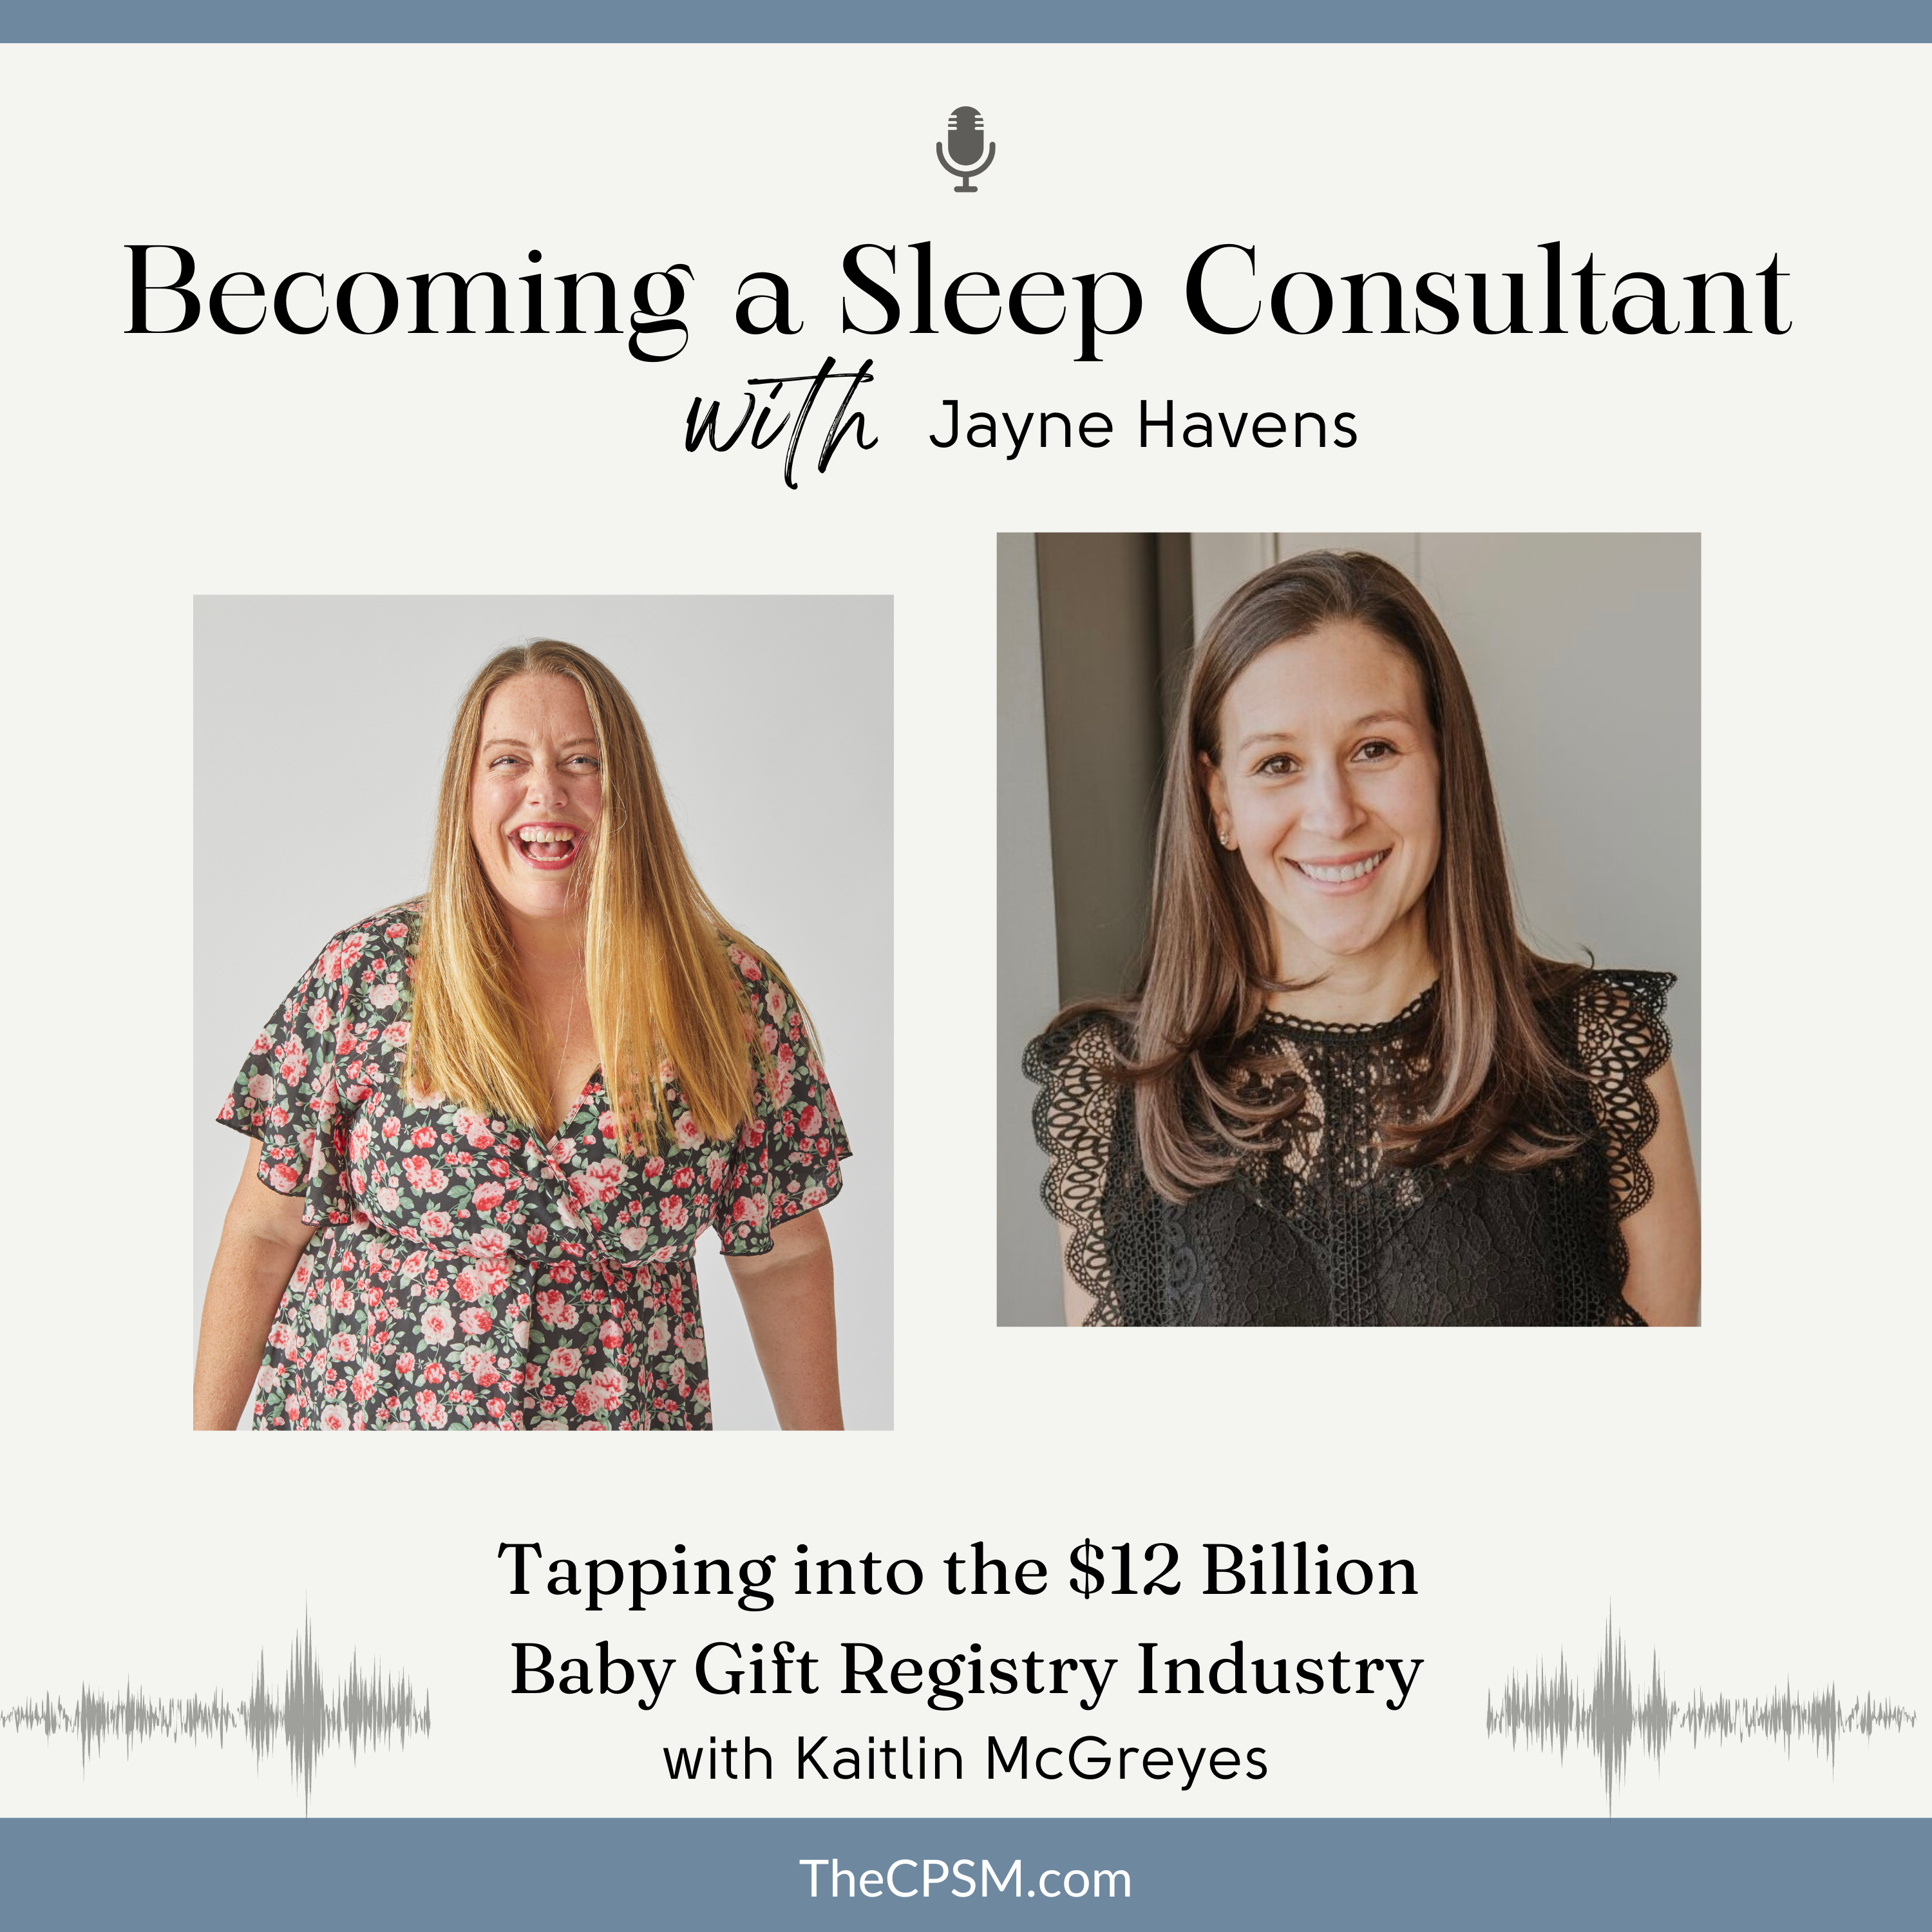 Tapping into the $12 Billion Baby Gift Registry Industry with Kaitlin McGreyes